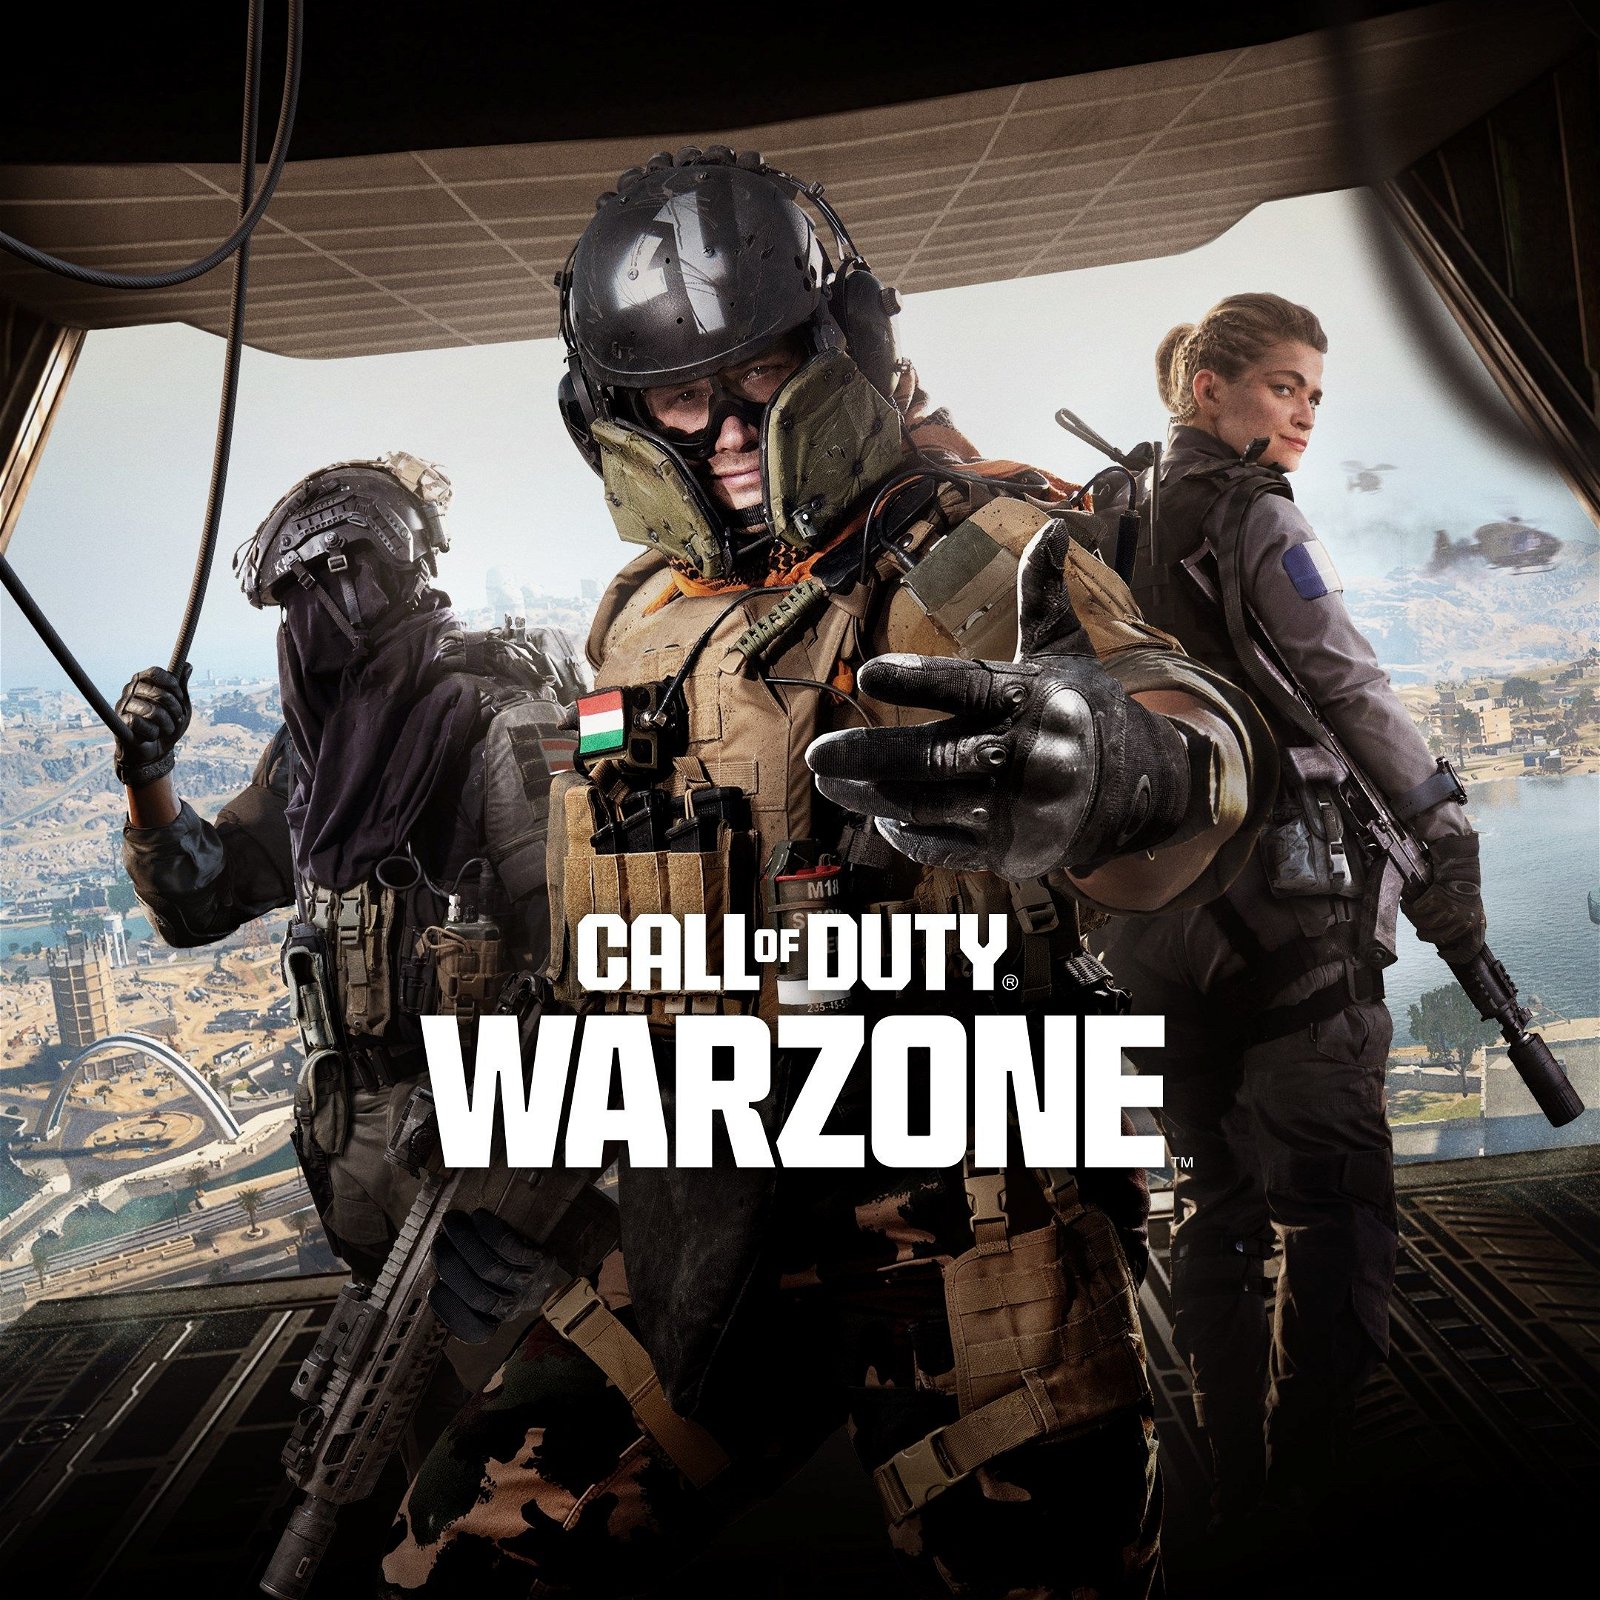 Image of Call of Duty: Warzone